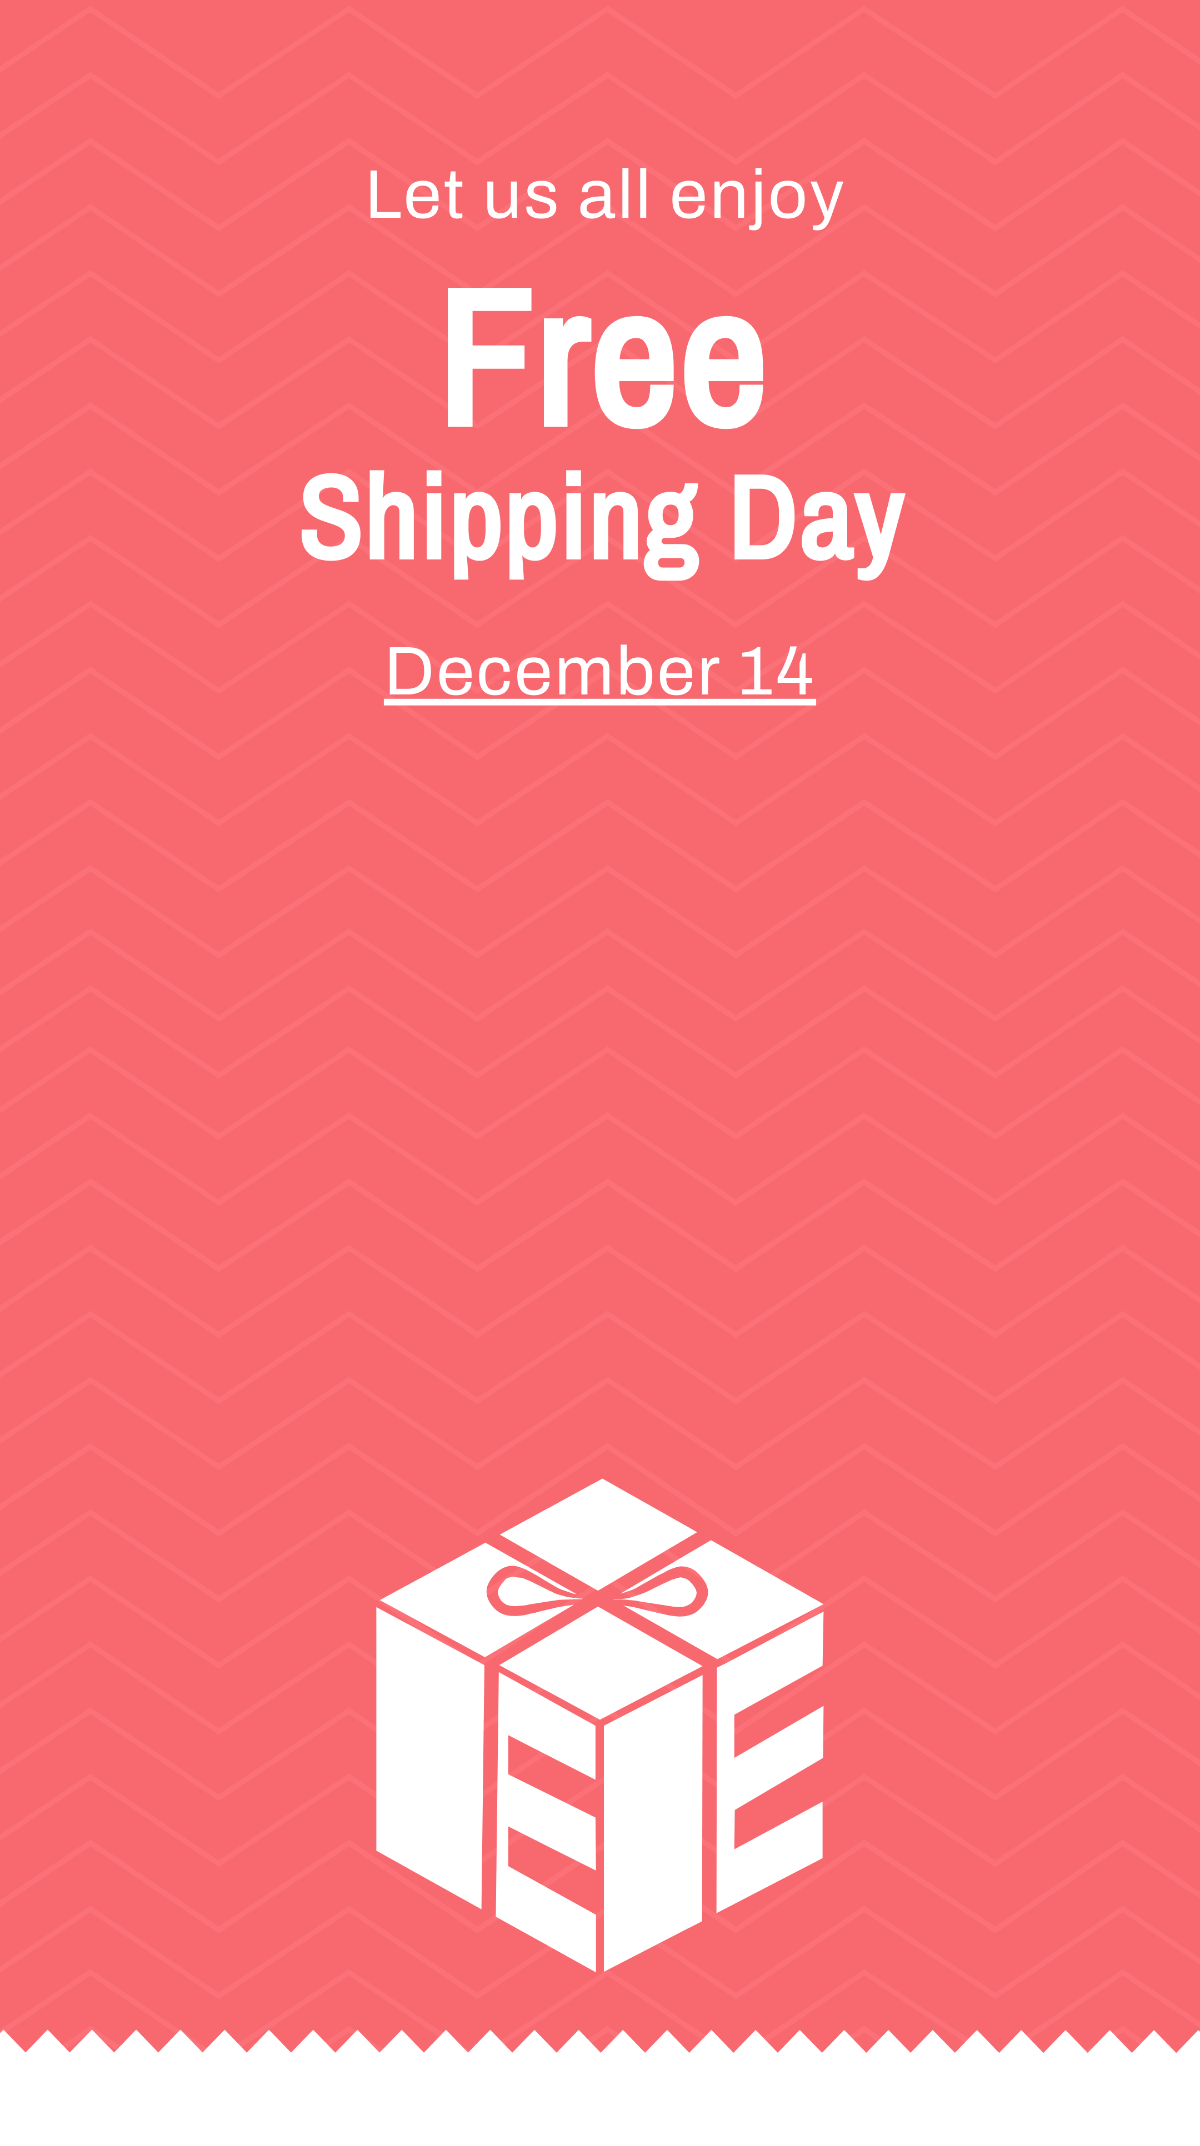 Shipping Day Snapchat Geofilter